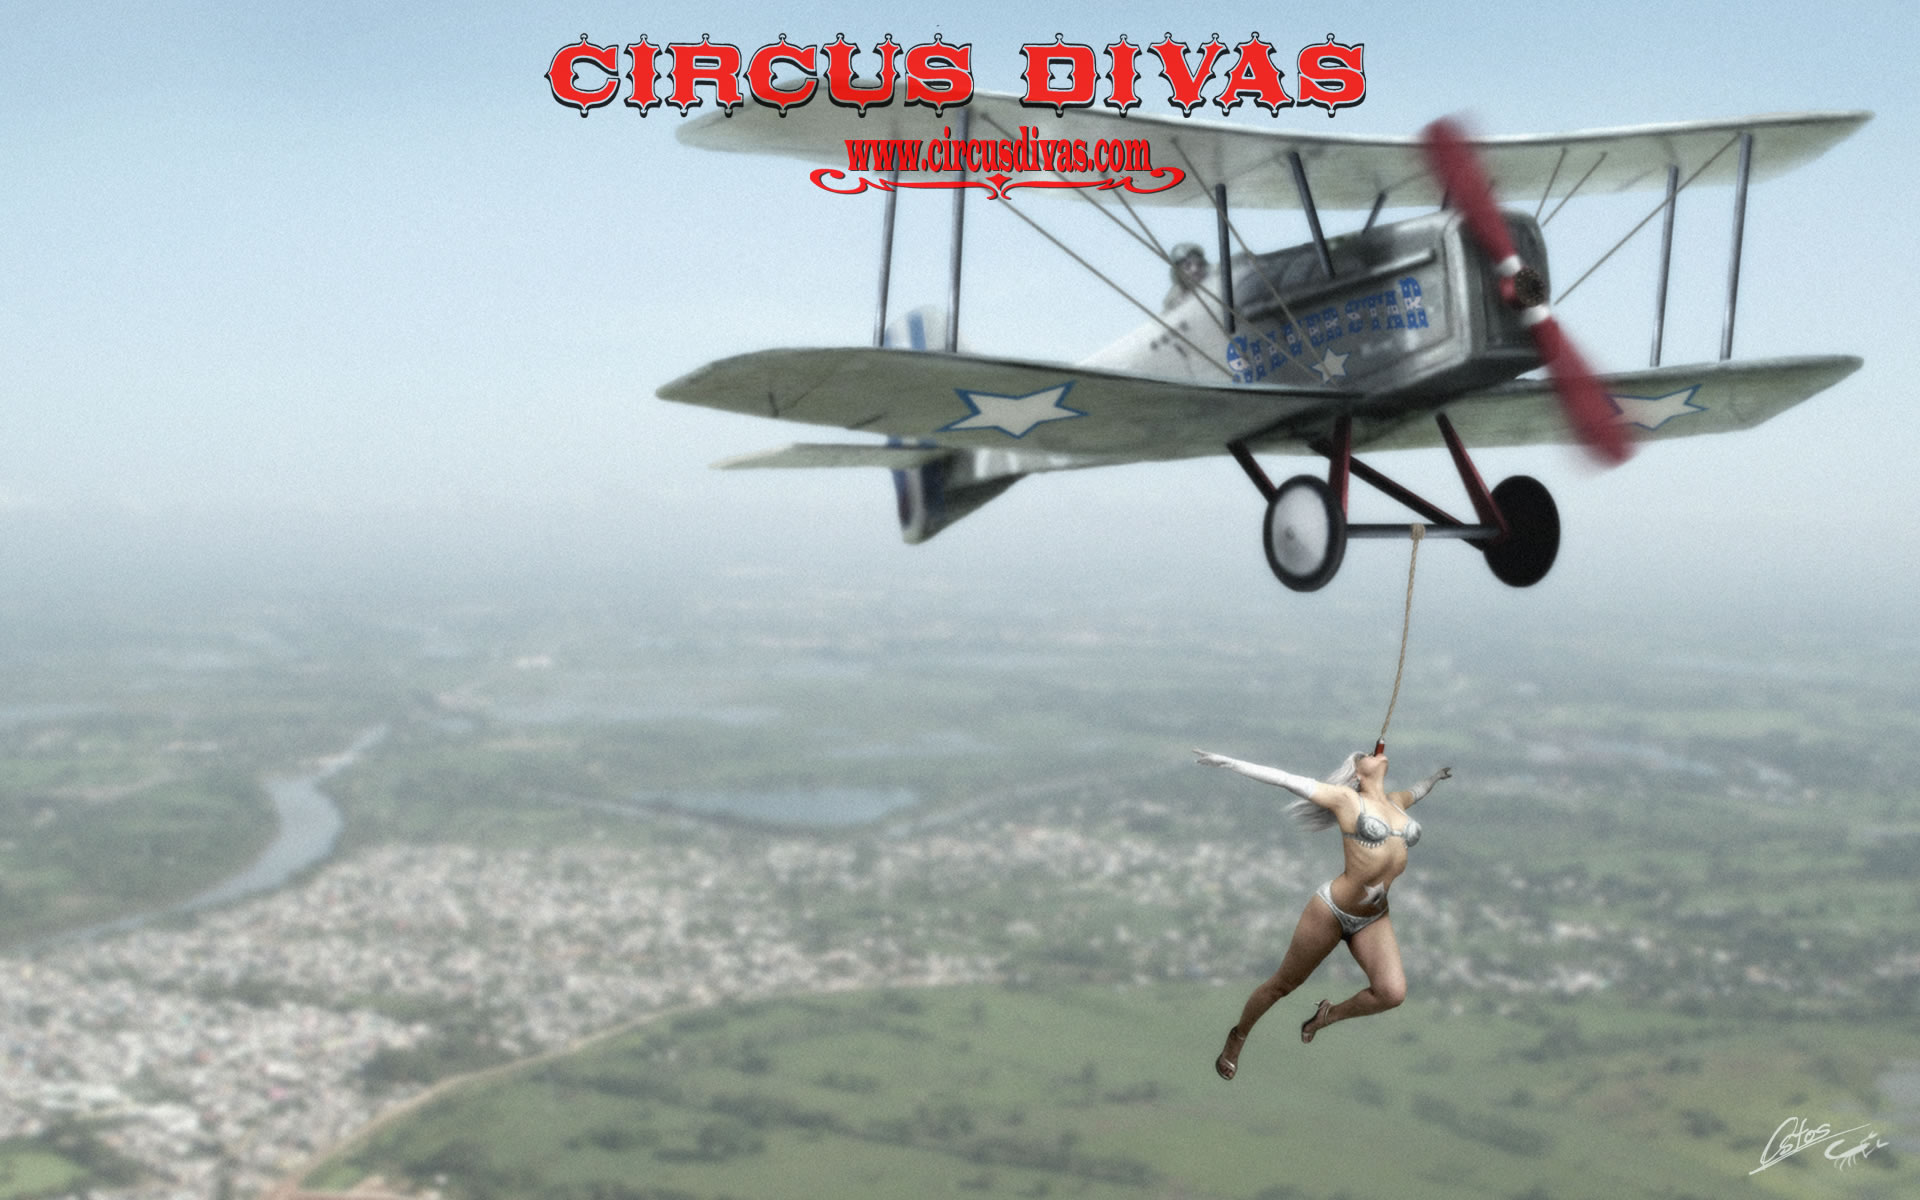 wallpapers artistic, circus, flying